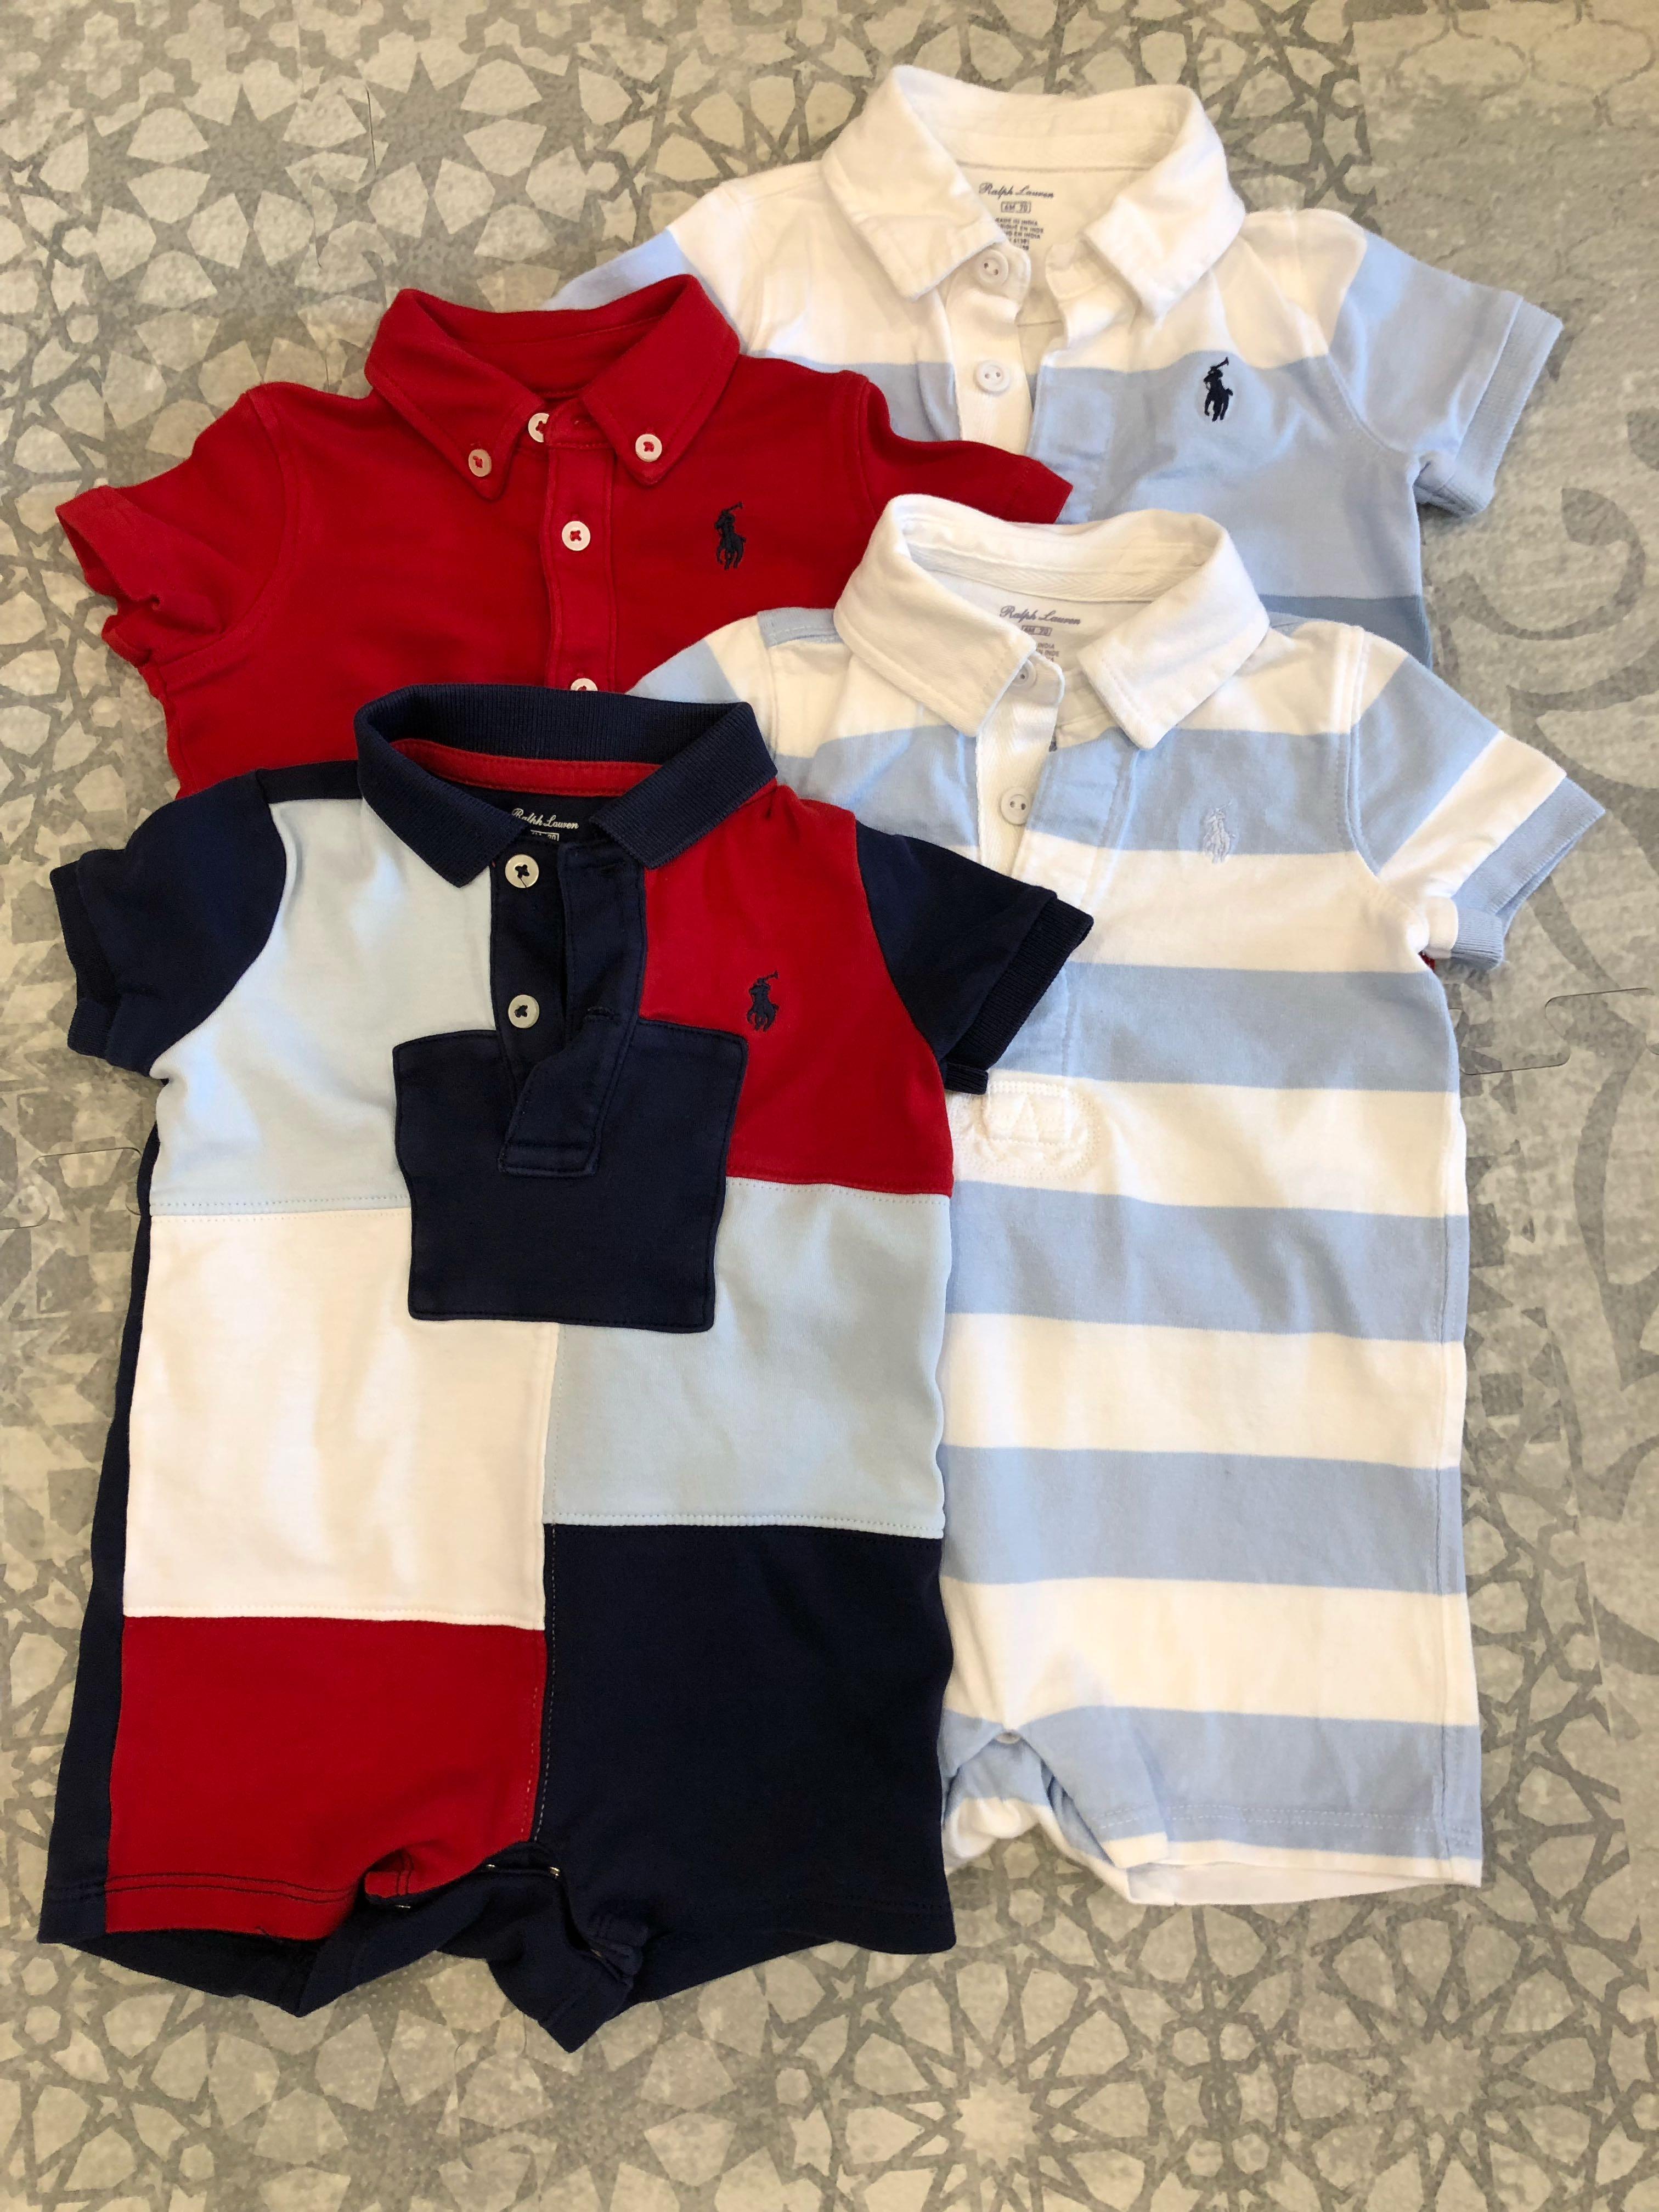 baby polo jumpsuit